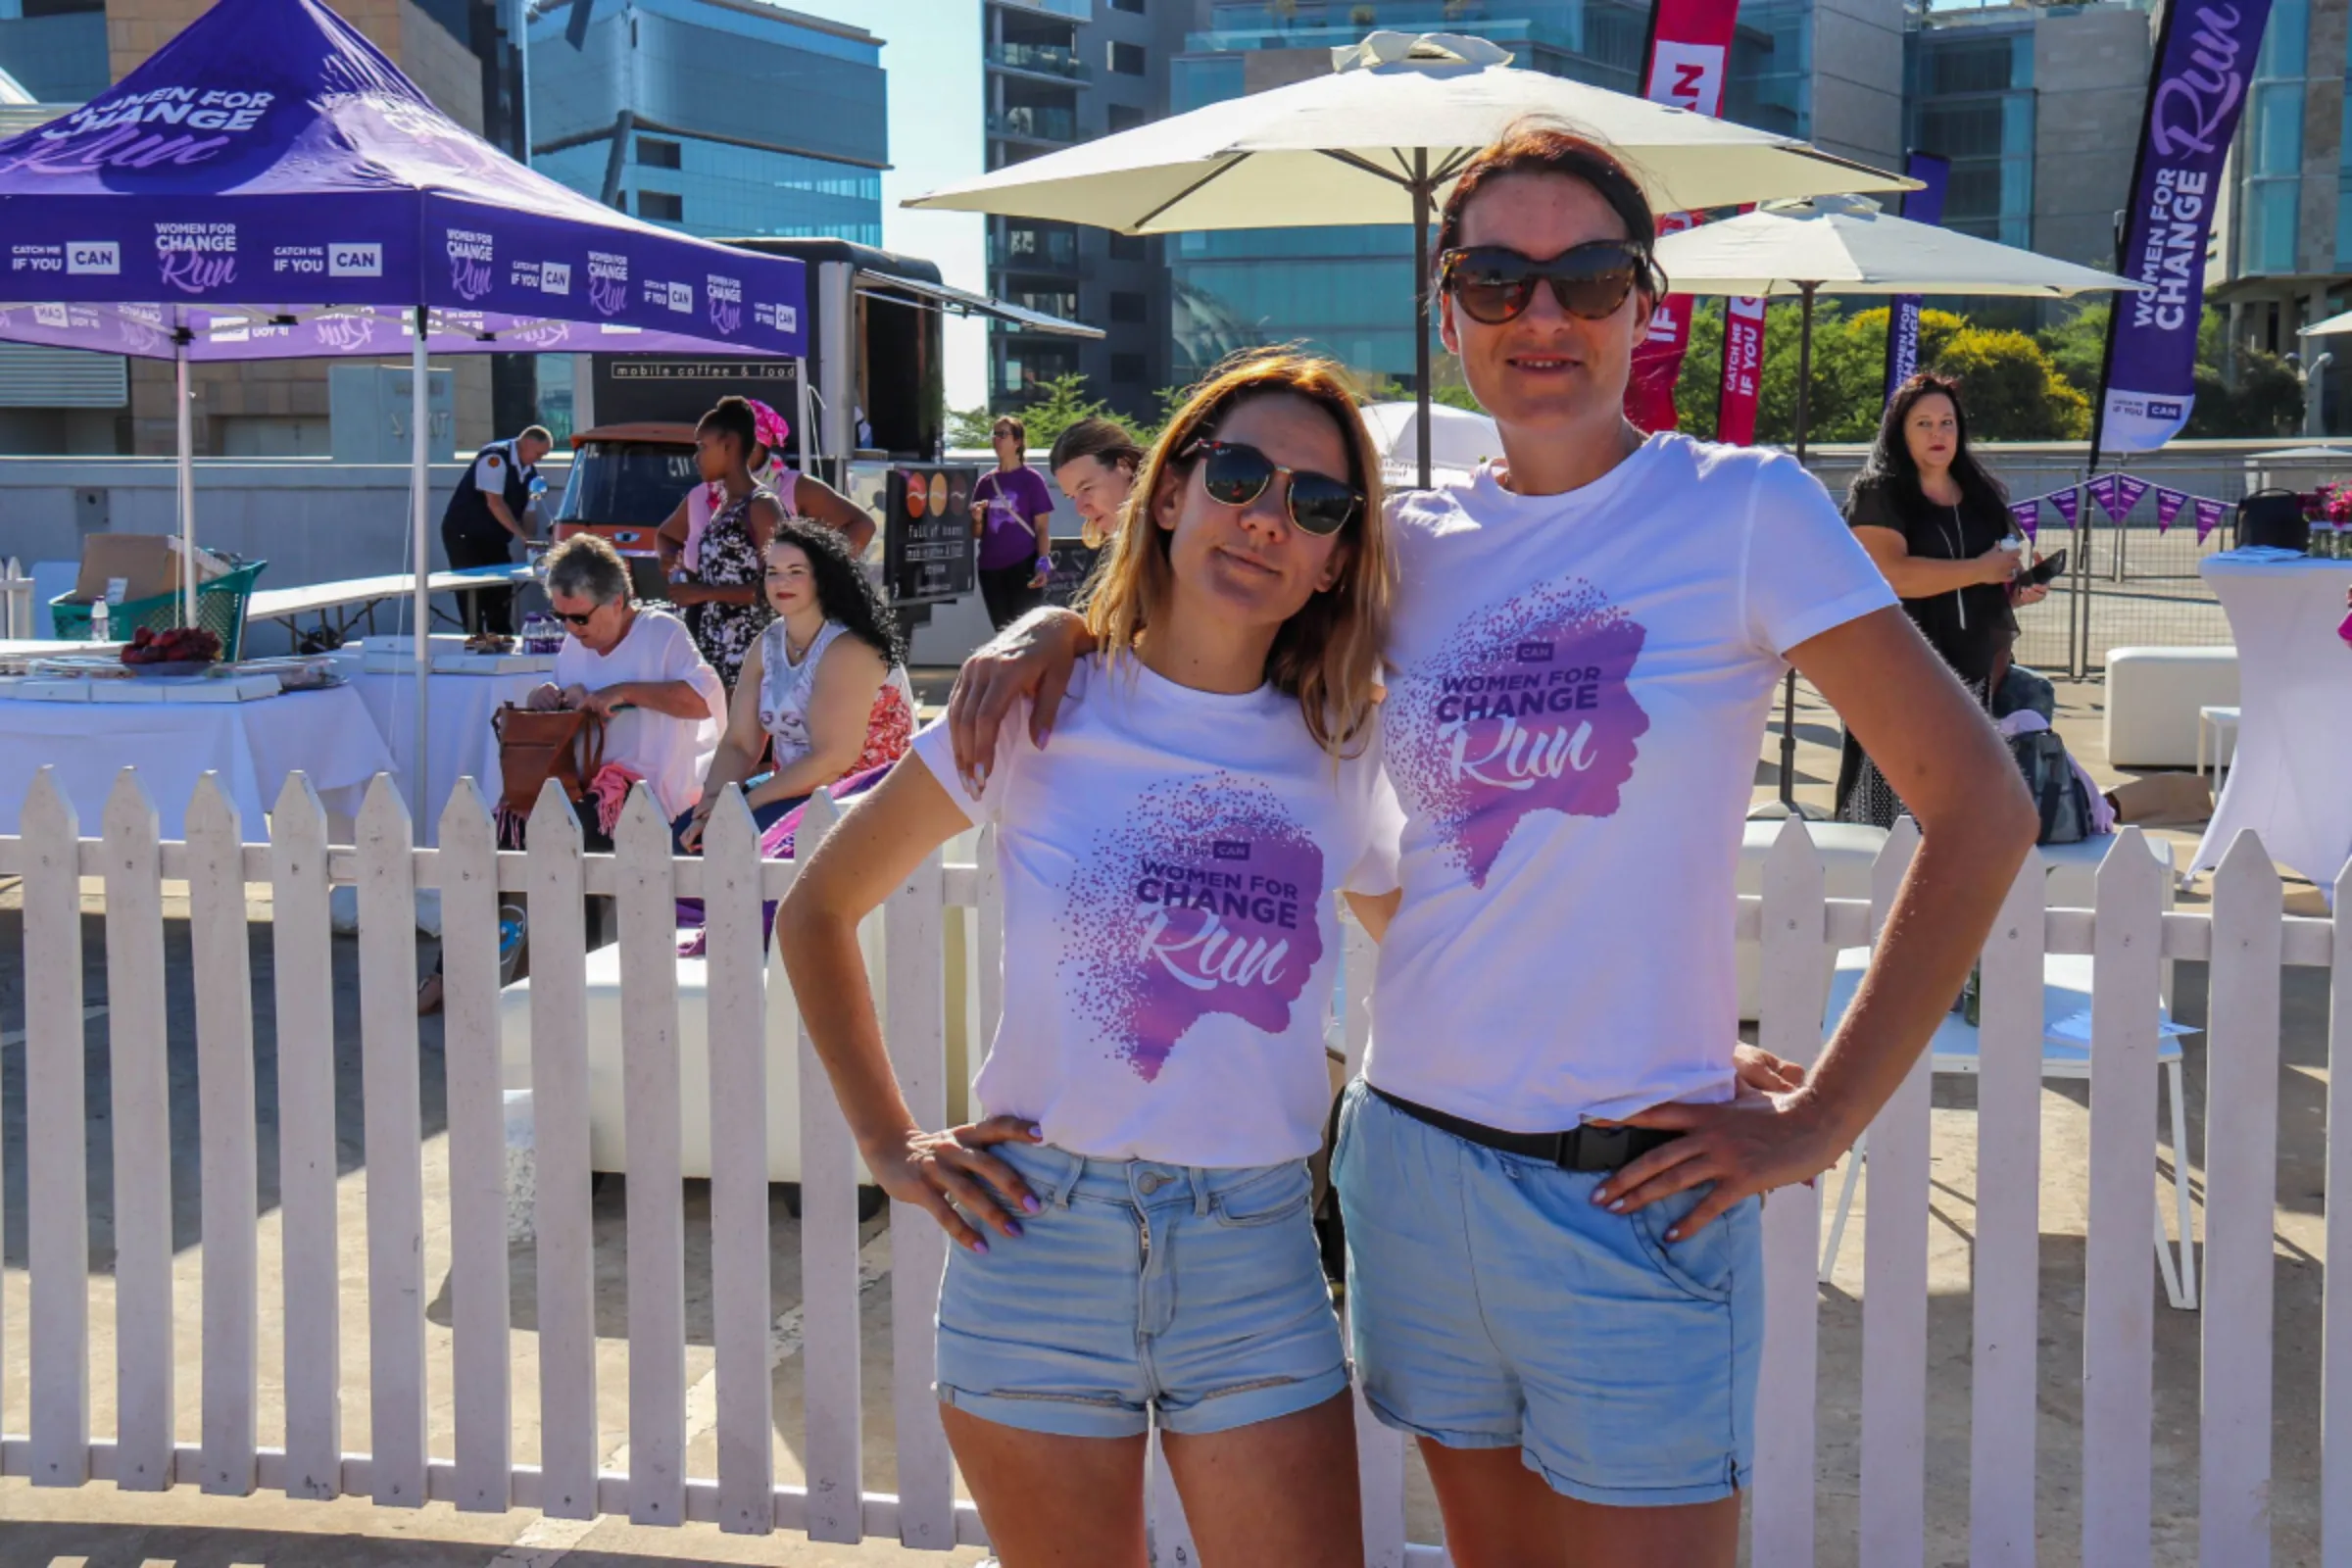 Founders of Women For Change Sabrina Walter and Leni Ullrich pose for a portrait at a Women For Change Run in Sandton City, South Africa, December 2019